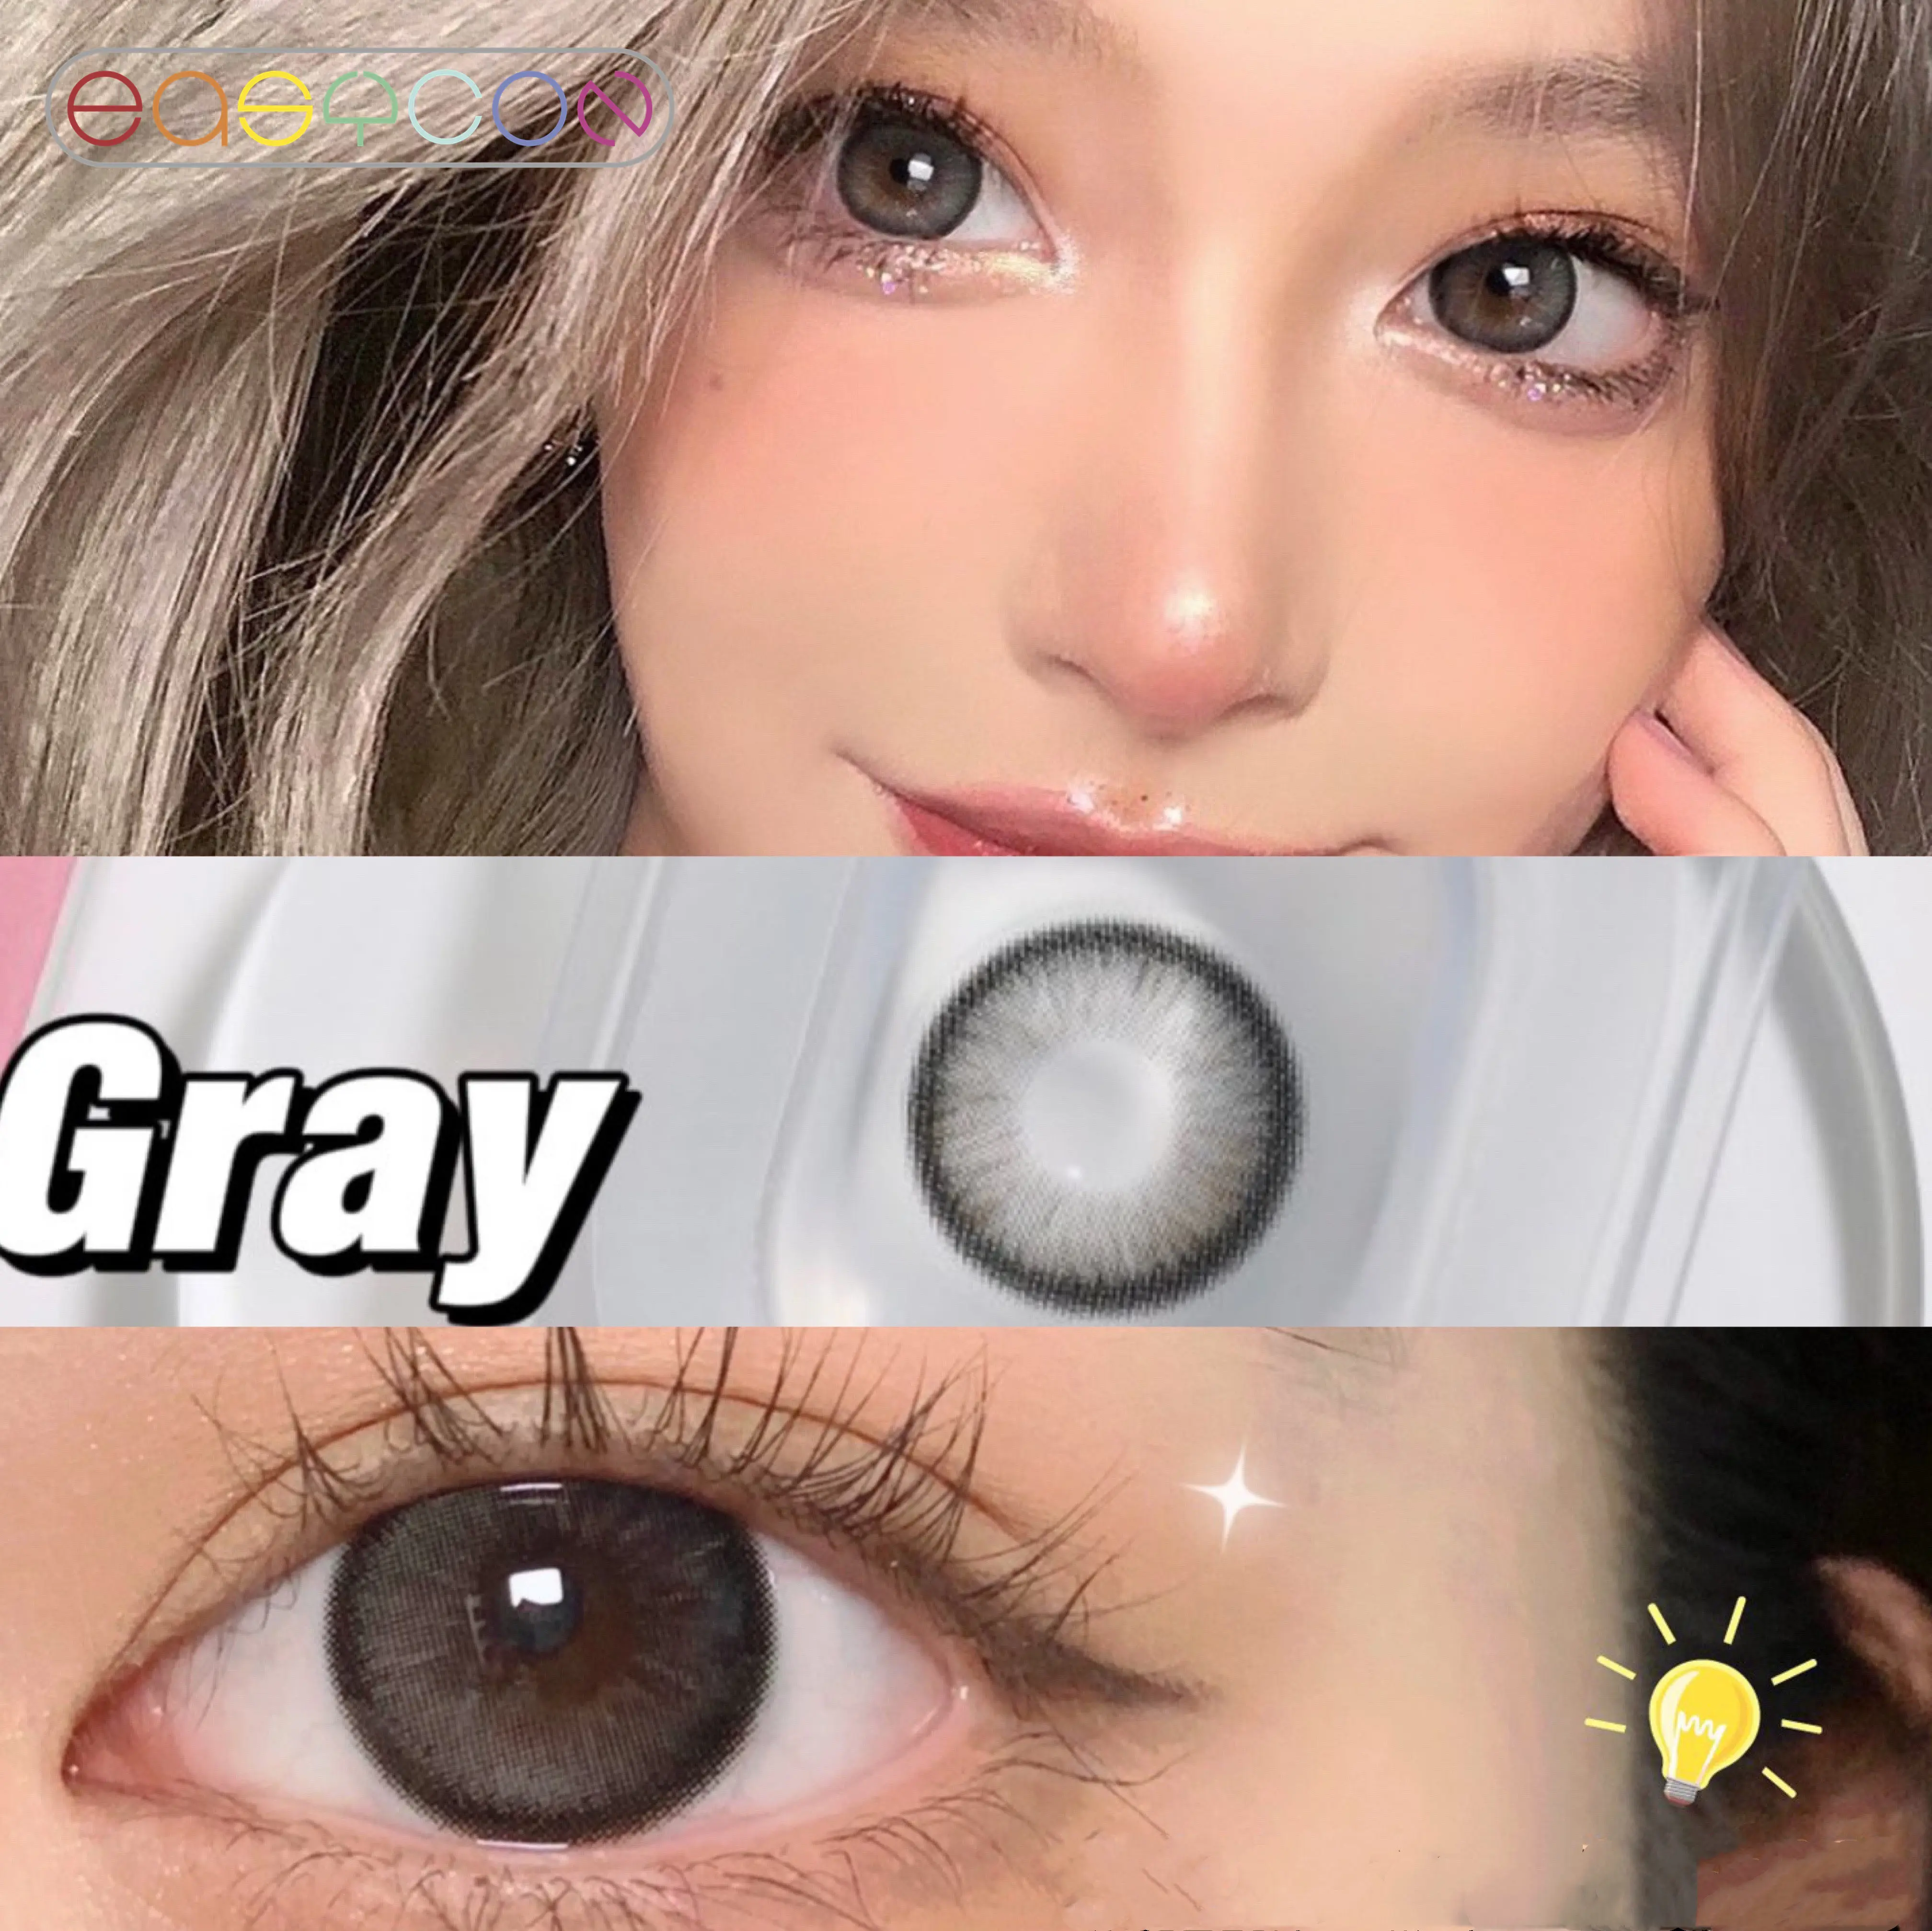 

EASYCON egg black gray unique High-end soft lens for Eyes Cosmetic Colored Contact Lenses Makeup big beauty pupil yearly Myopia